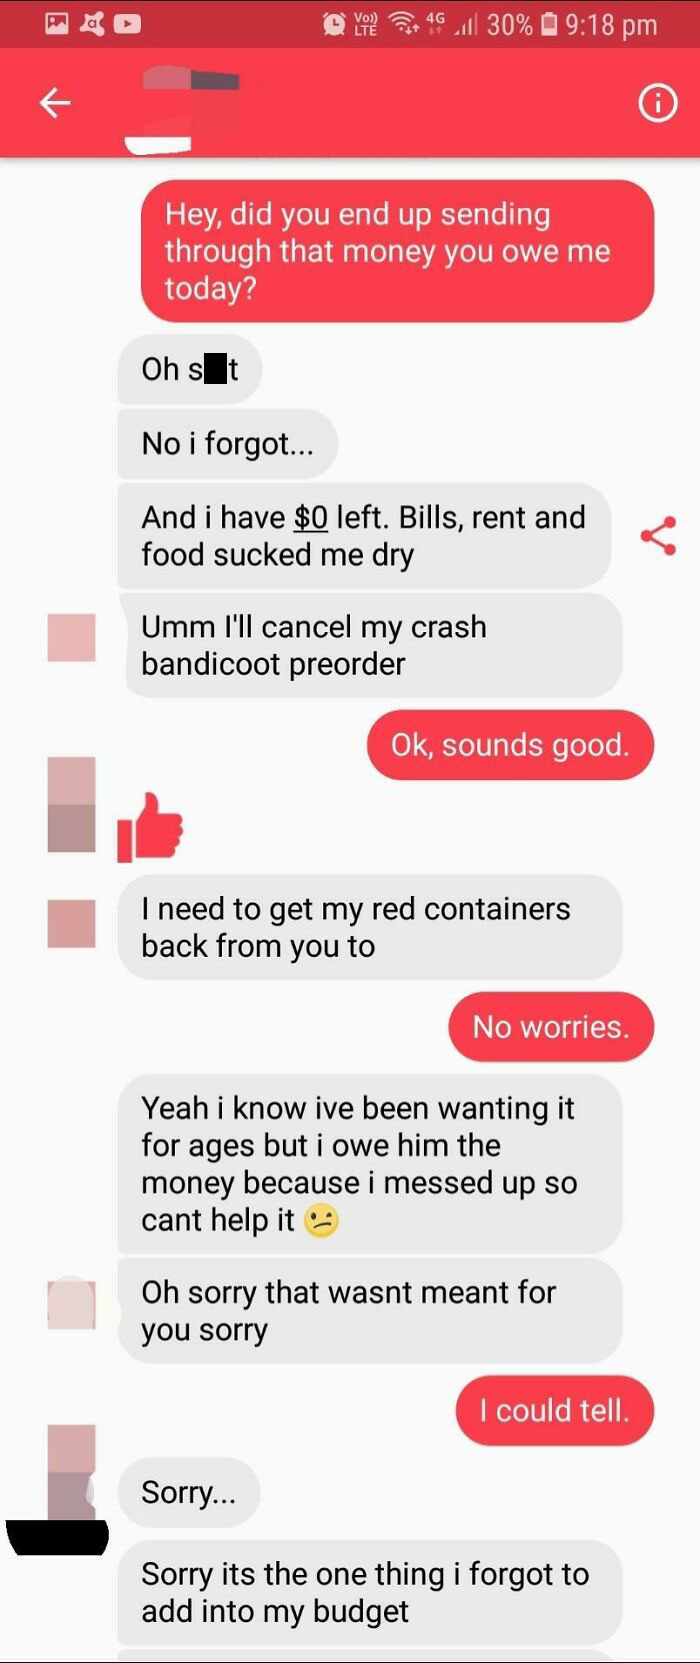 Ex Tries To Guilt Me A Week After Promising To Pay Back $30 For "Accidentally" Using My Card To Pay For Food Delivery.